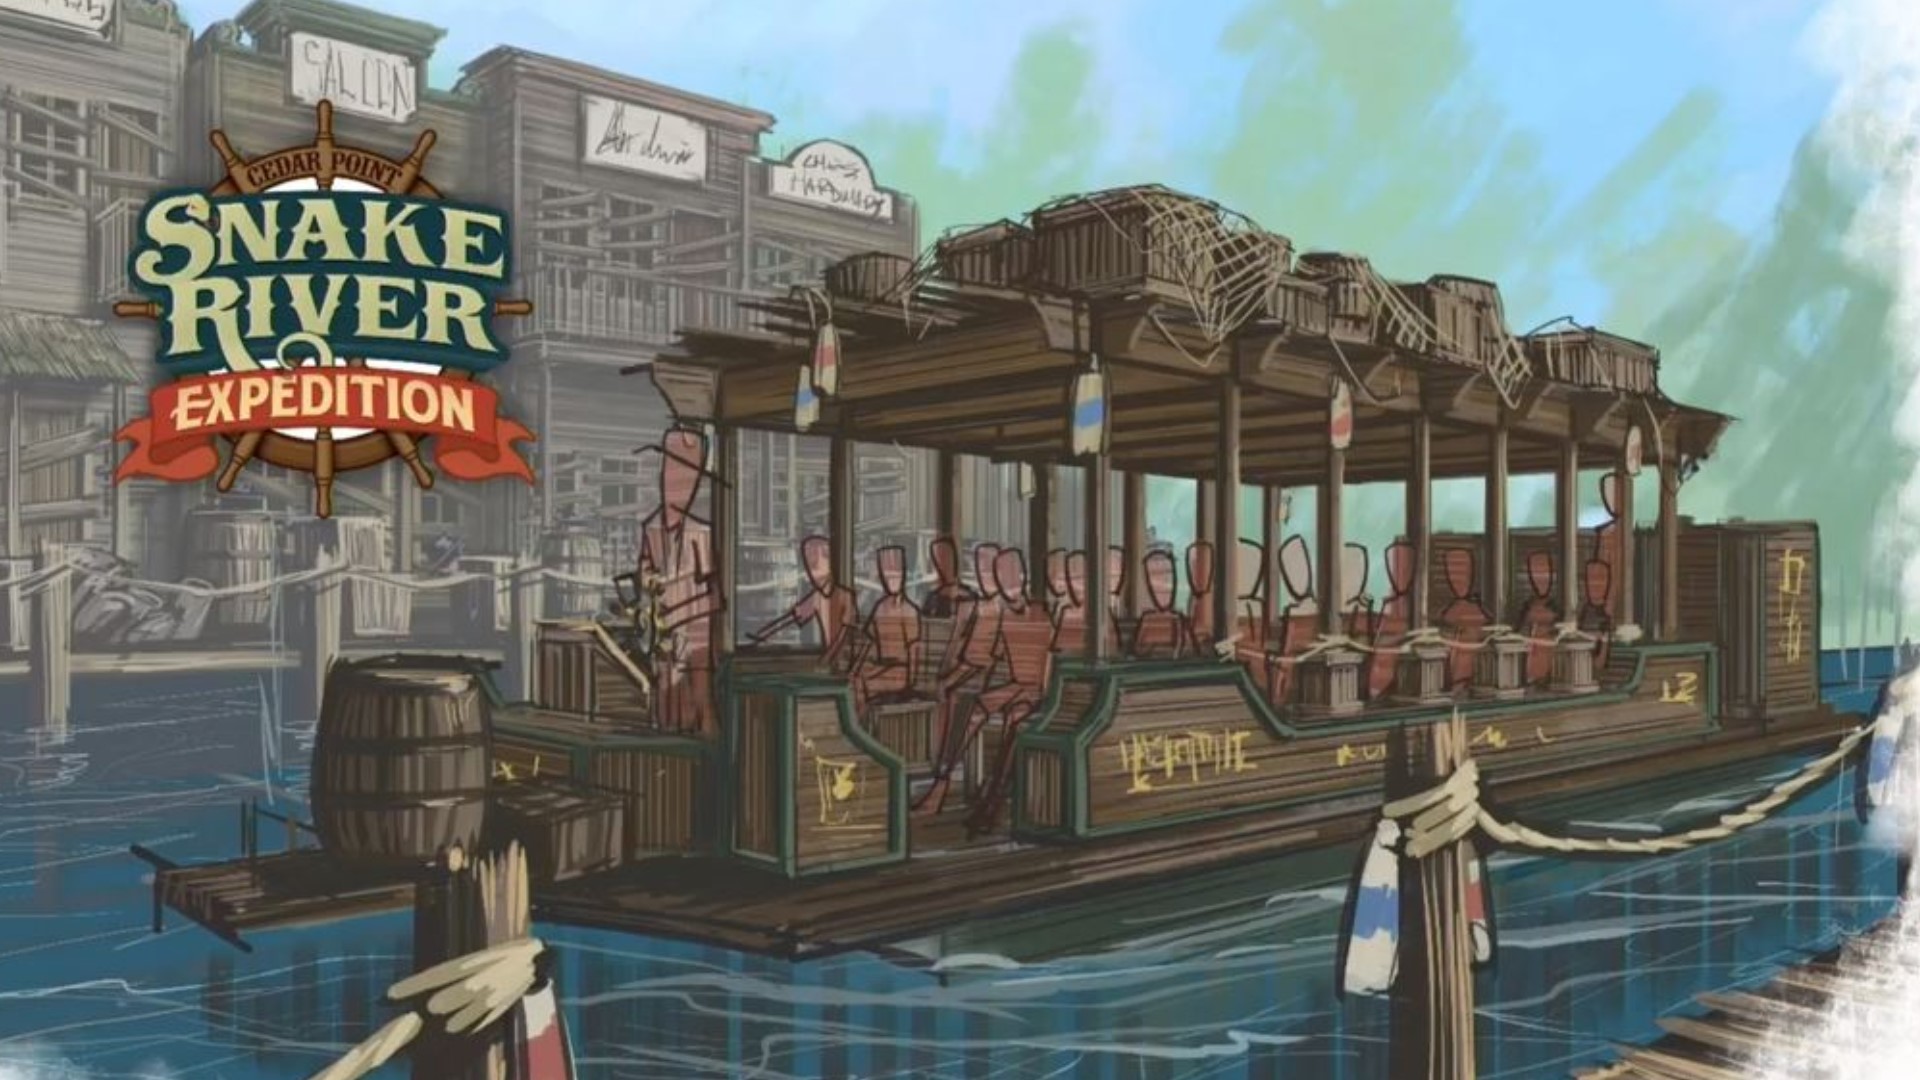 Cedar Point has announced Snake River Expedition as a new ride for the 2020 season in celebration of their 150th anniversary. The new attraction is a boat ride.